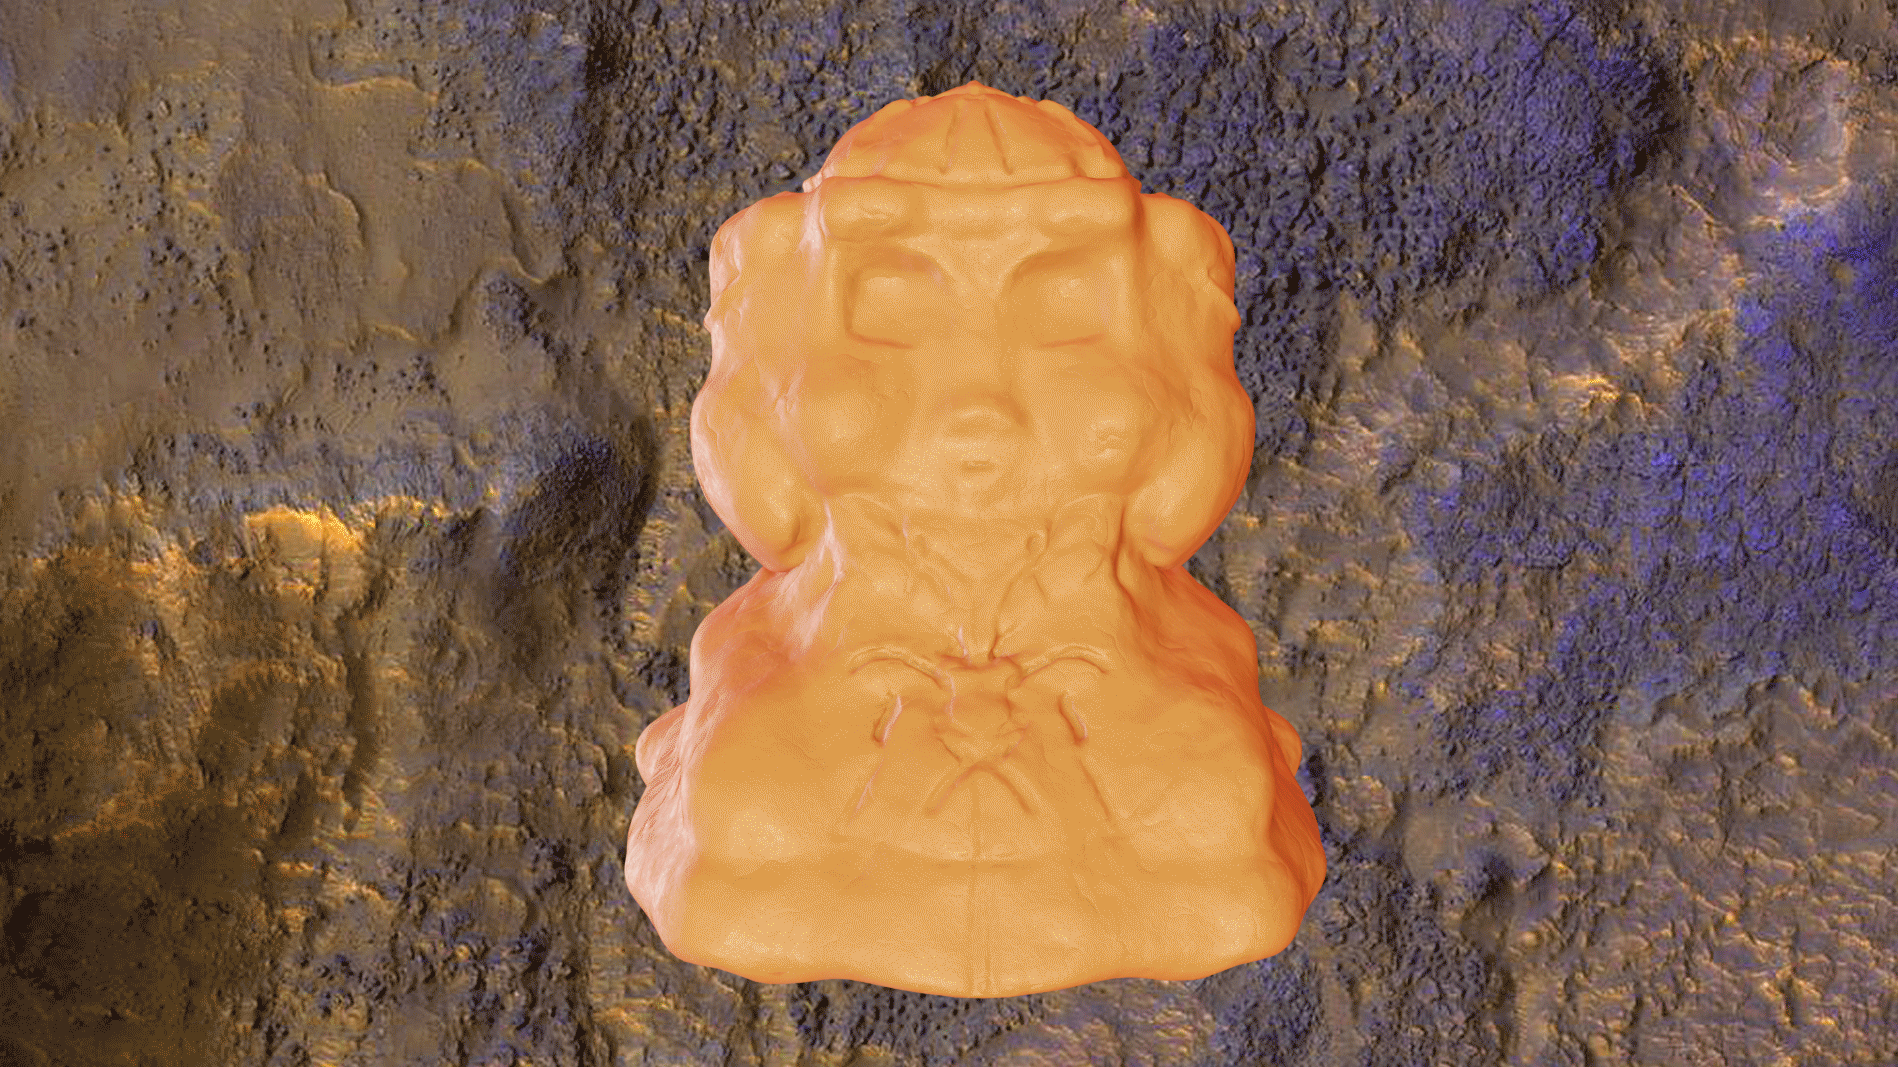 An orange clay-like figure sits in a kneeling position as they rotate against a luminescent background of rocks.